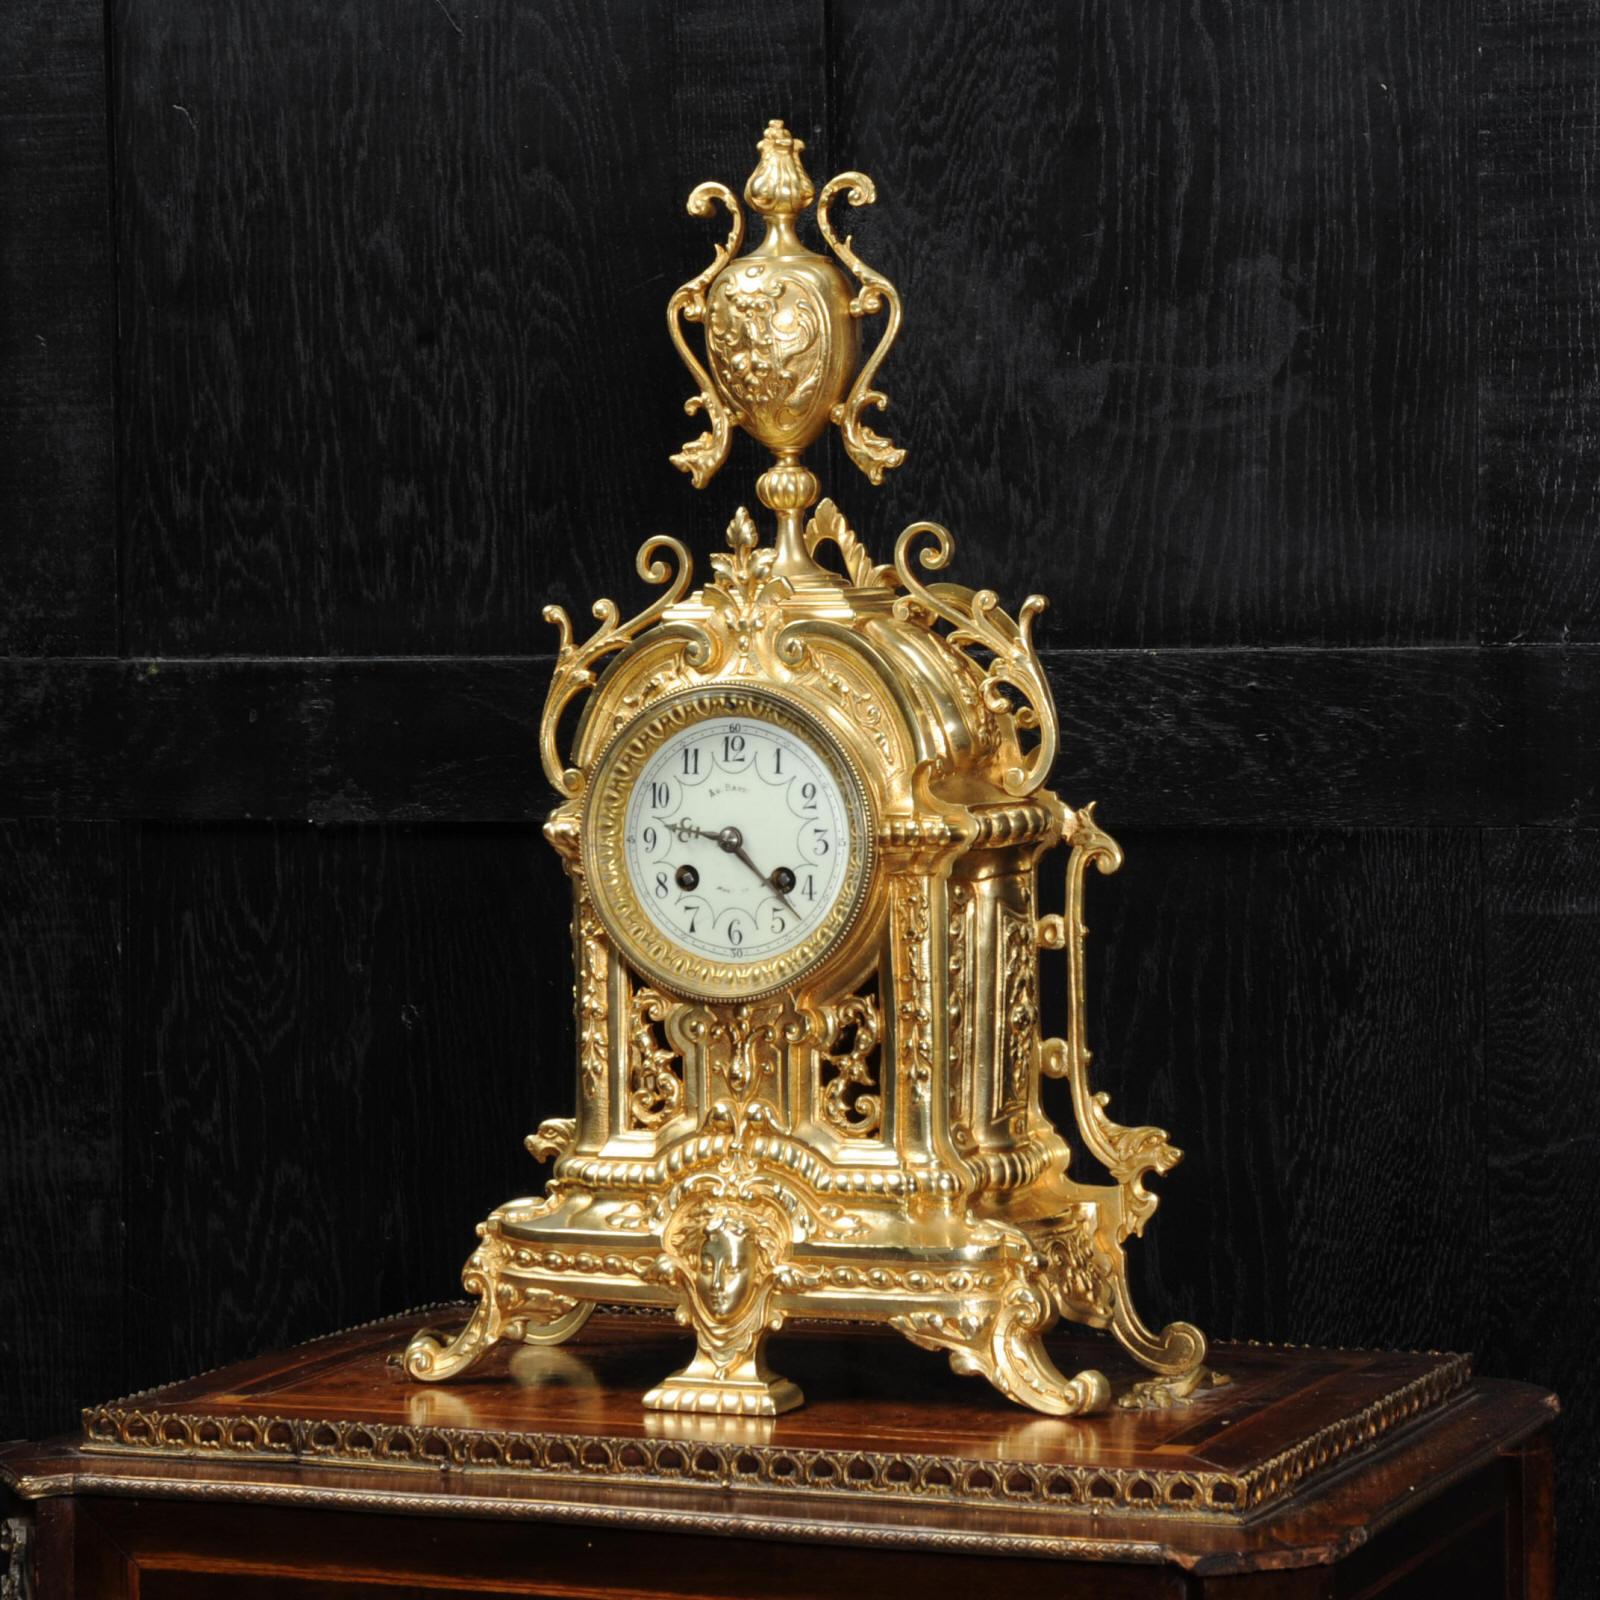 A lovely original antique French gilt bronze clock, circa 1890, beautifully modelled in the Baroque style. Decorated with scrolling acanthus, a goddess mask and a large, elaborate urn. The front is fretted to lighten the design and allow a glimpse